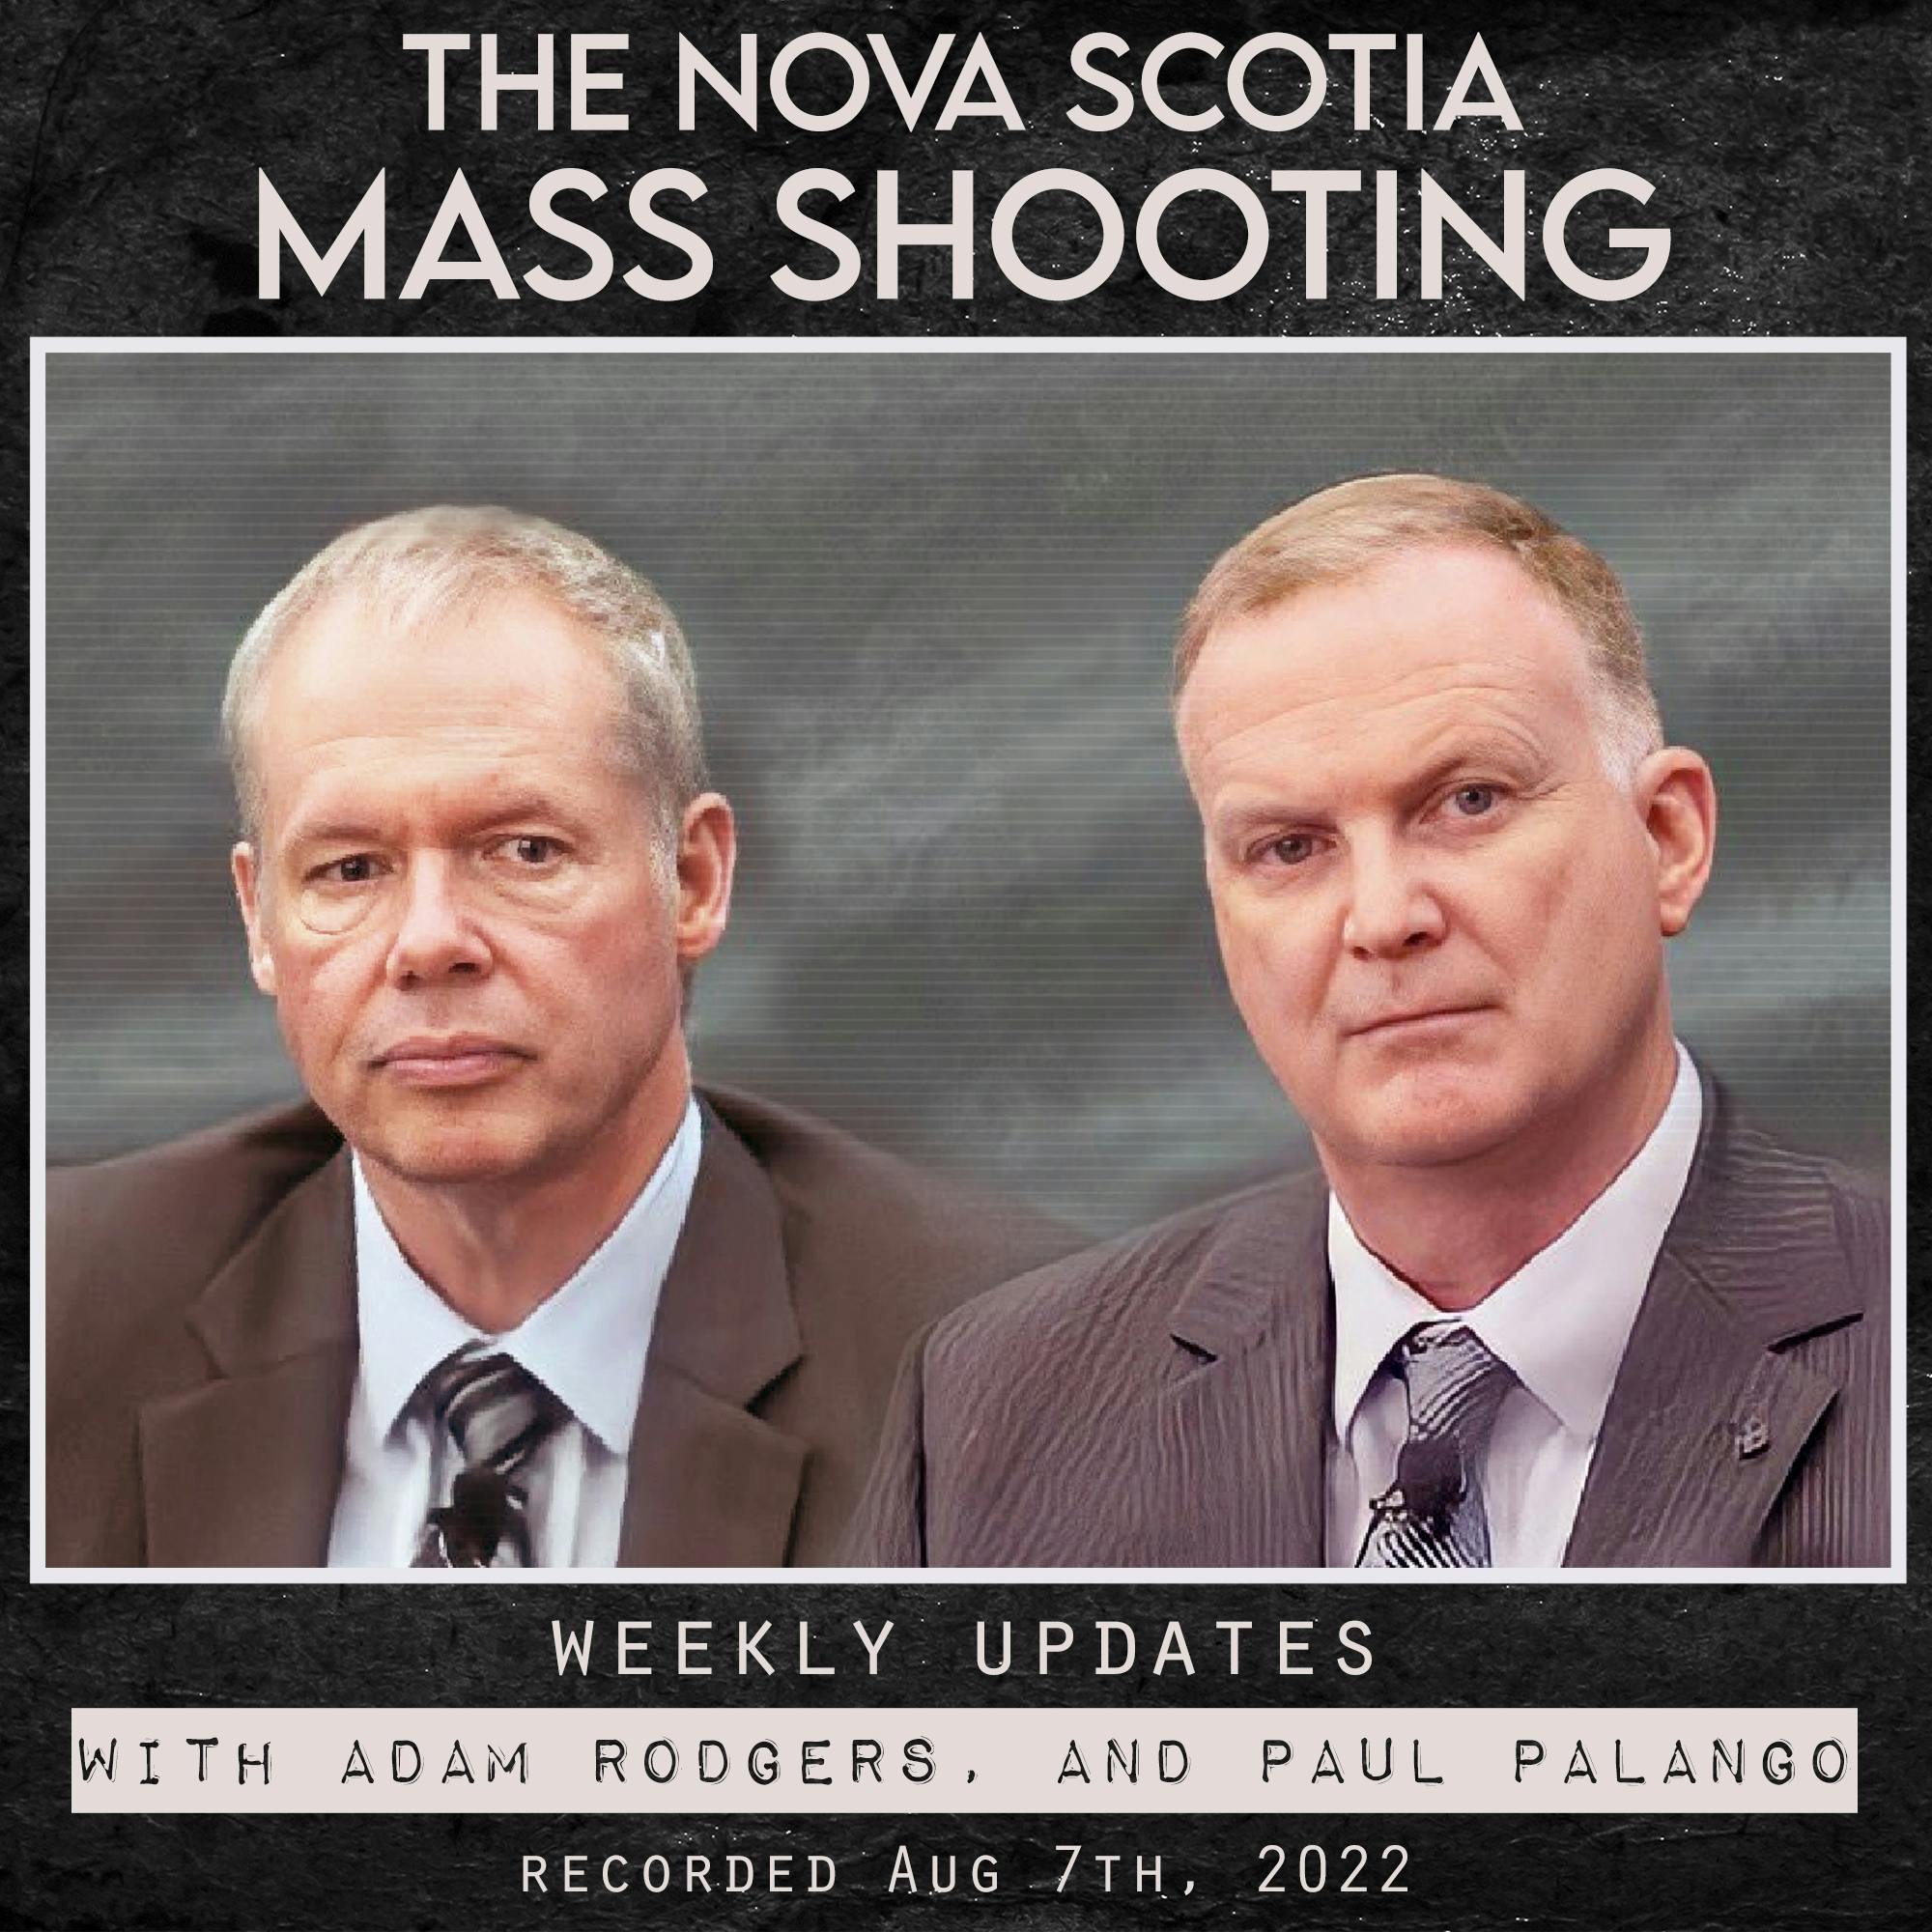 the Nova Scotia Mass Shooting - Aug 7th, 2022 - weekly updates (with Paul Palango and Adam Rodgers)